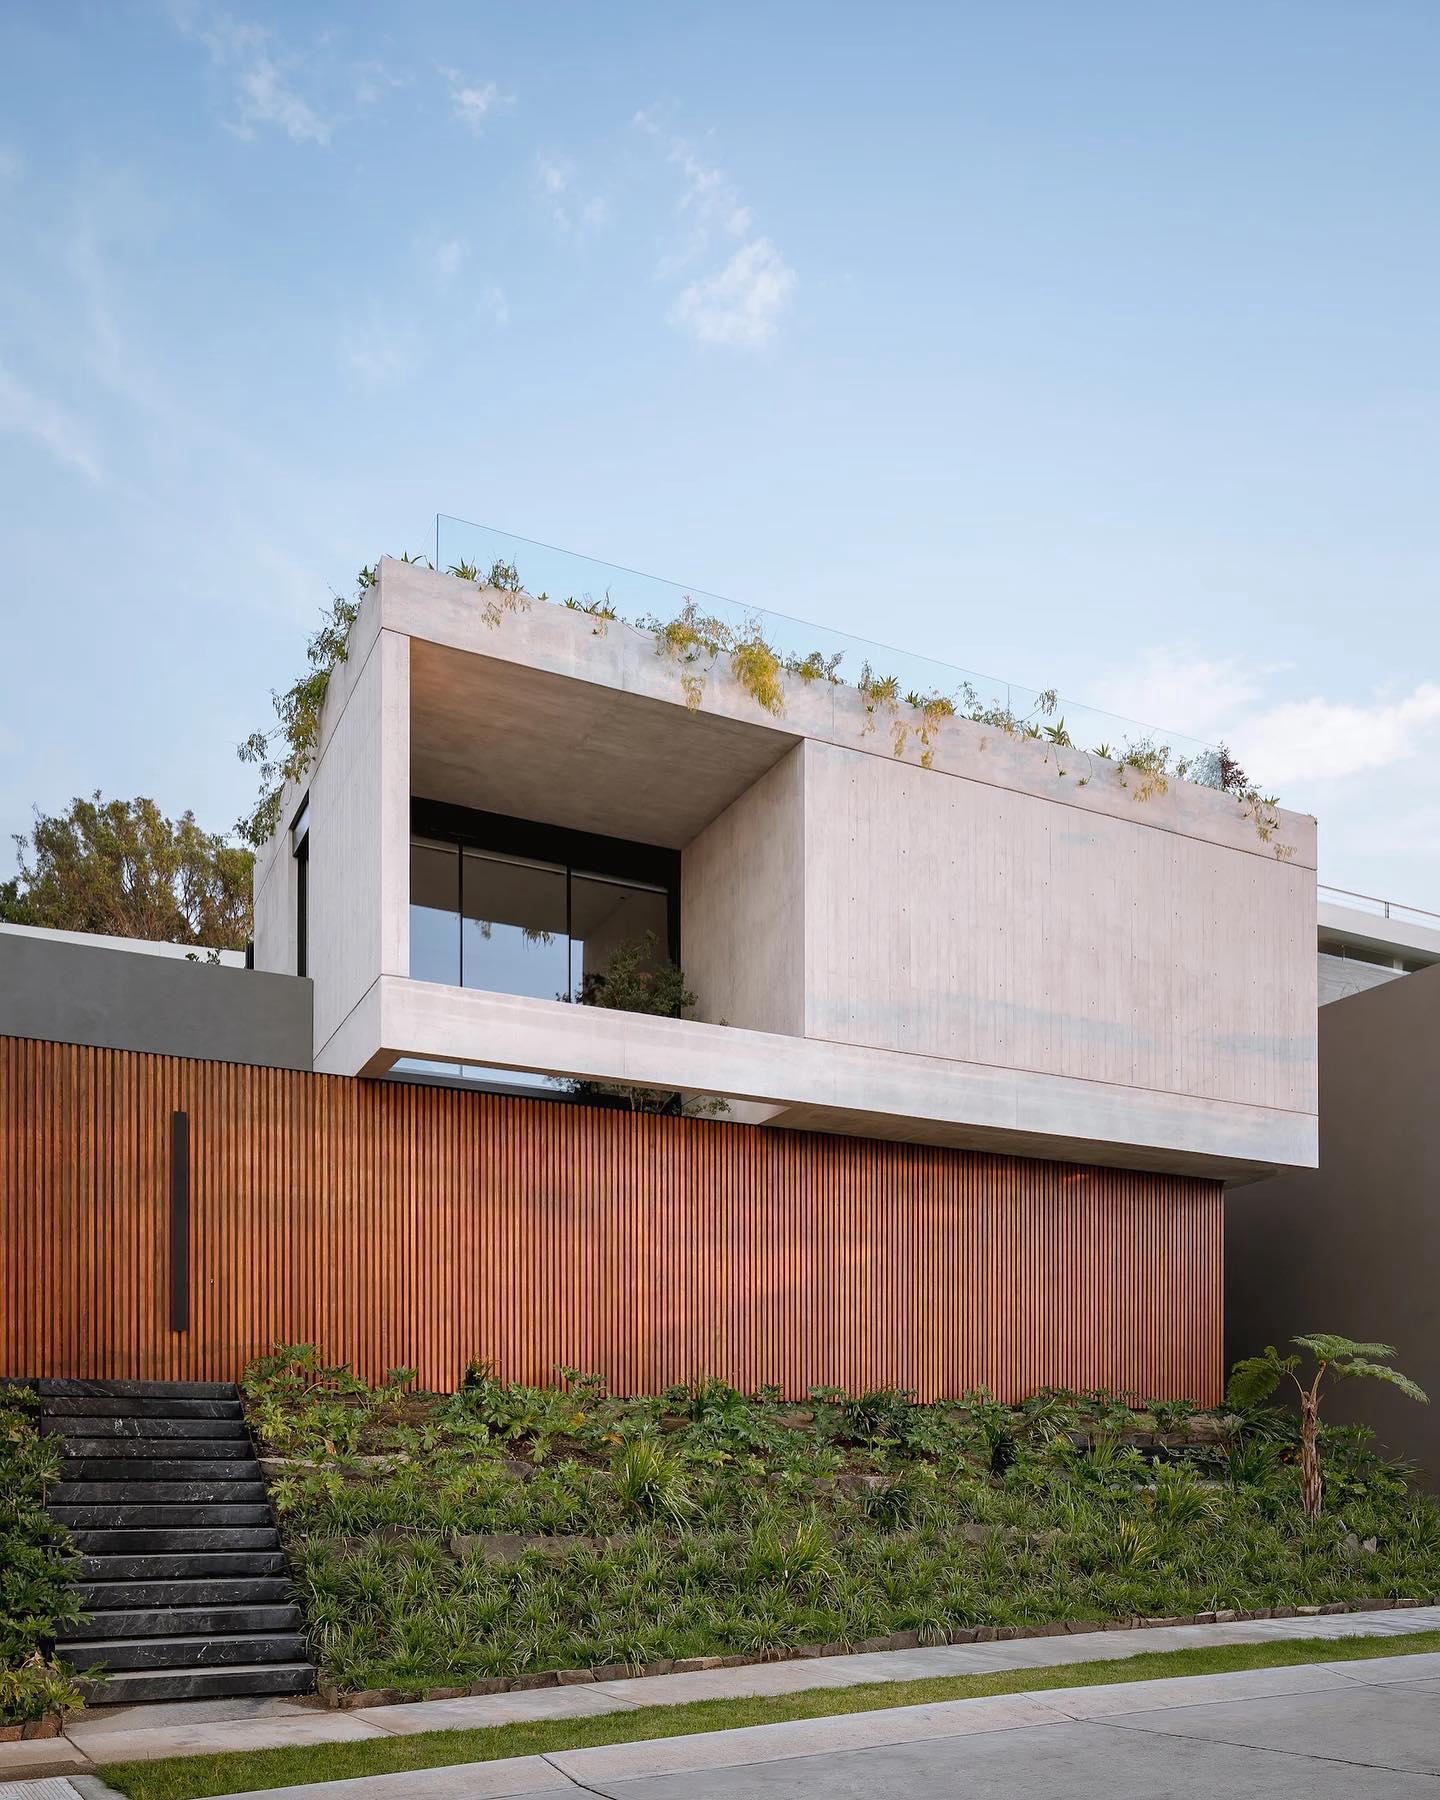 “The design of GDL 3 House located in Zapopan, Mexico, became a challenge due to the many restrictio